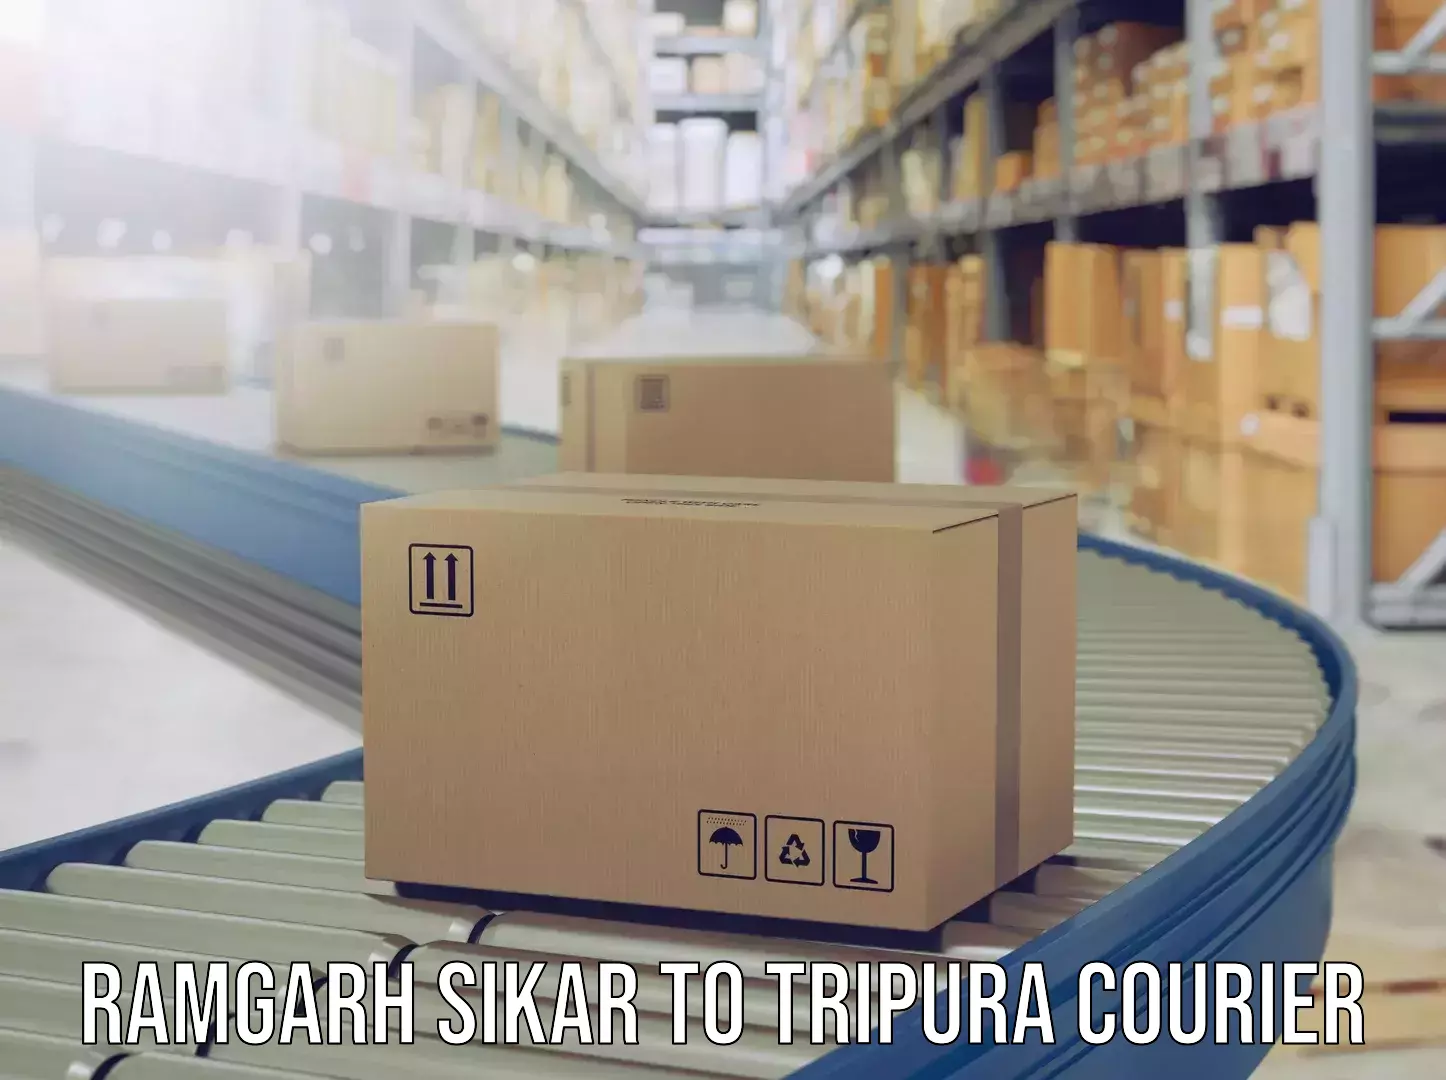 Reliable baggage delivery Ramgarh Sikar to Udaipur Tripura